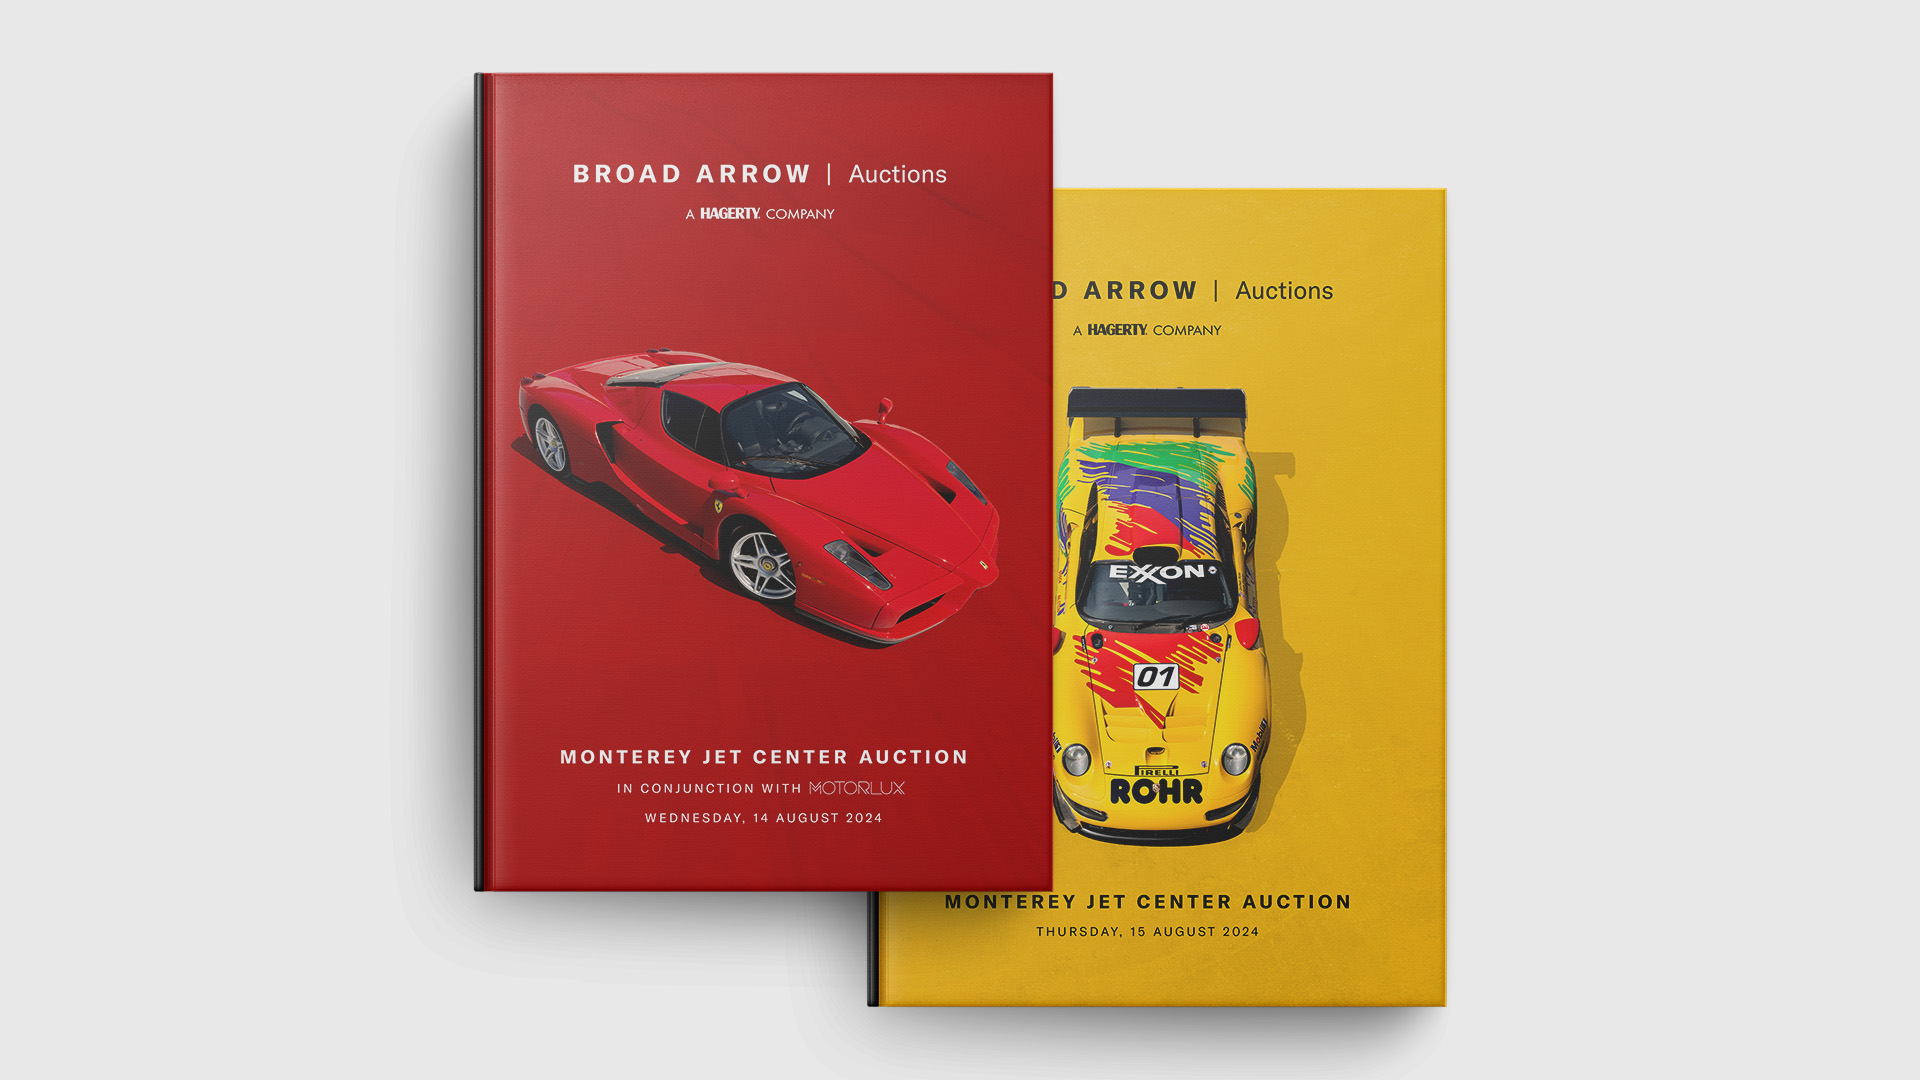 Broad Arrow Auctions Catalog Covers